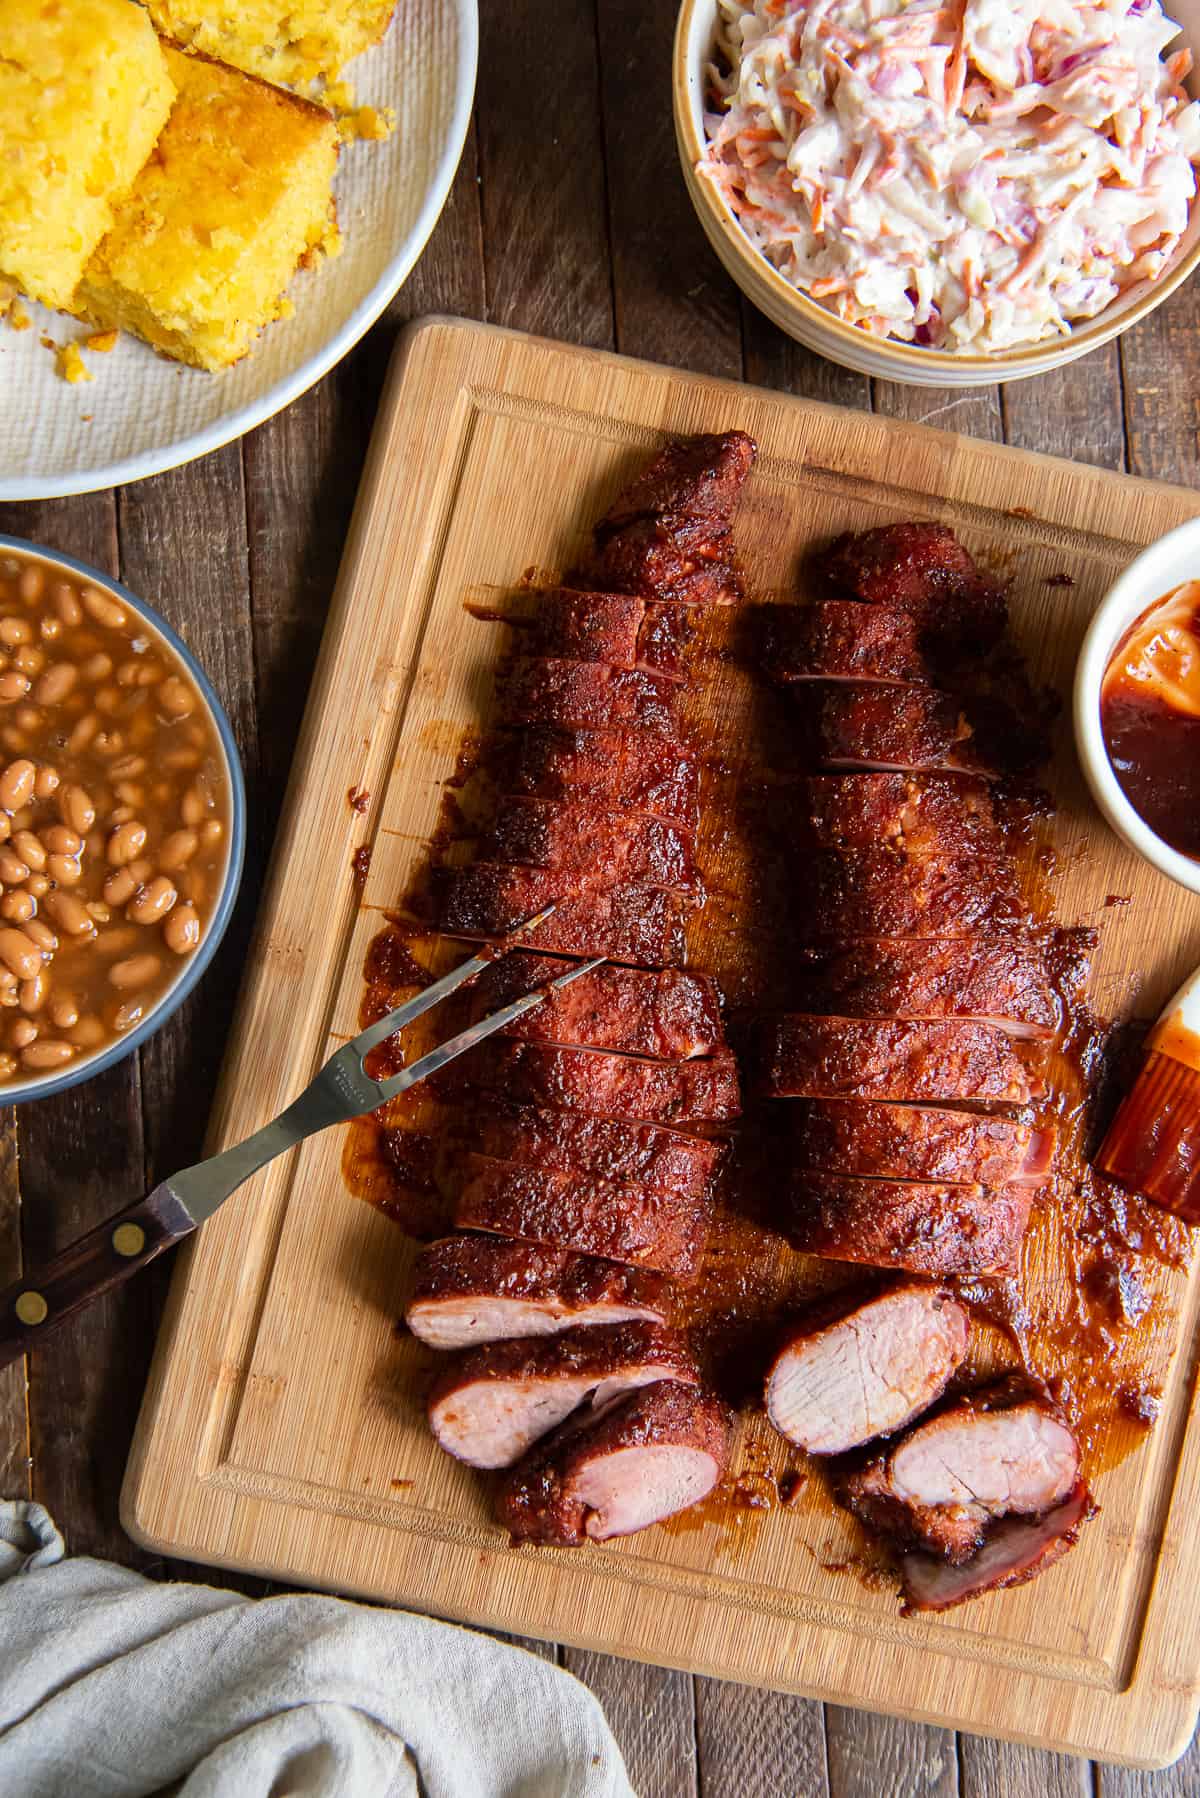 Sliced smoked pork tenderloin on a cutting board next to a platter of cornbread, a bowl of beans, and coleslaw.